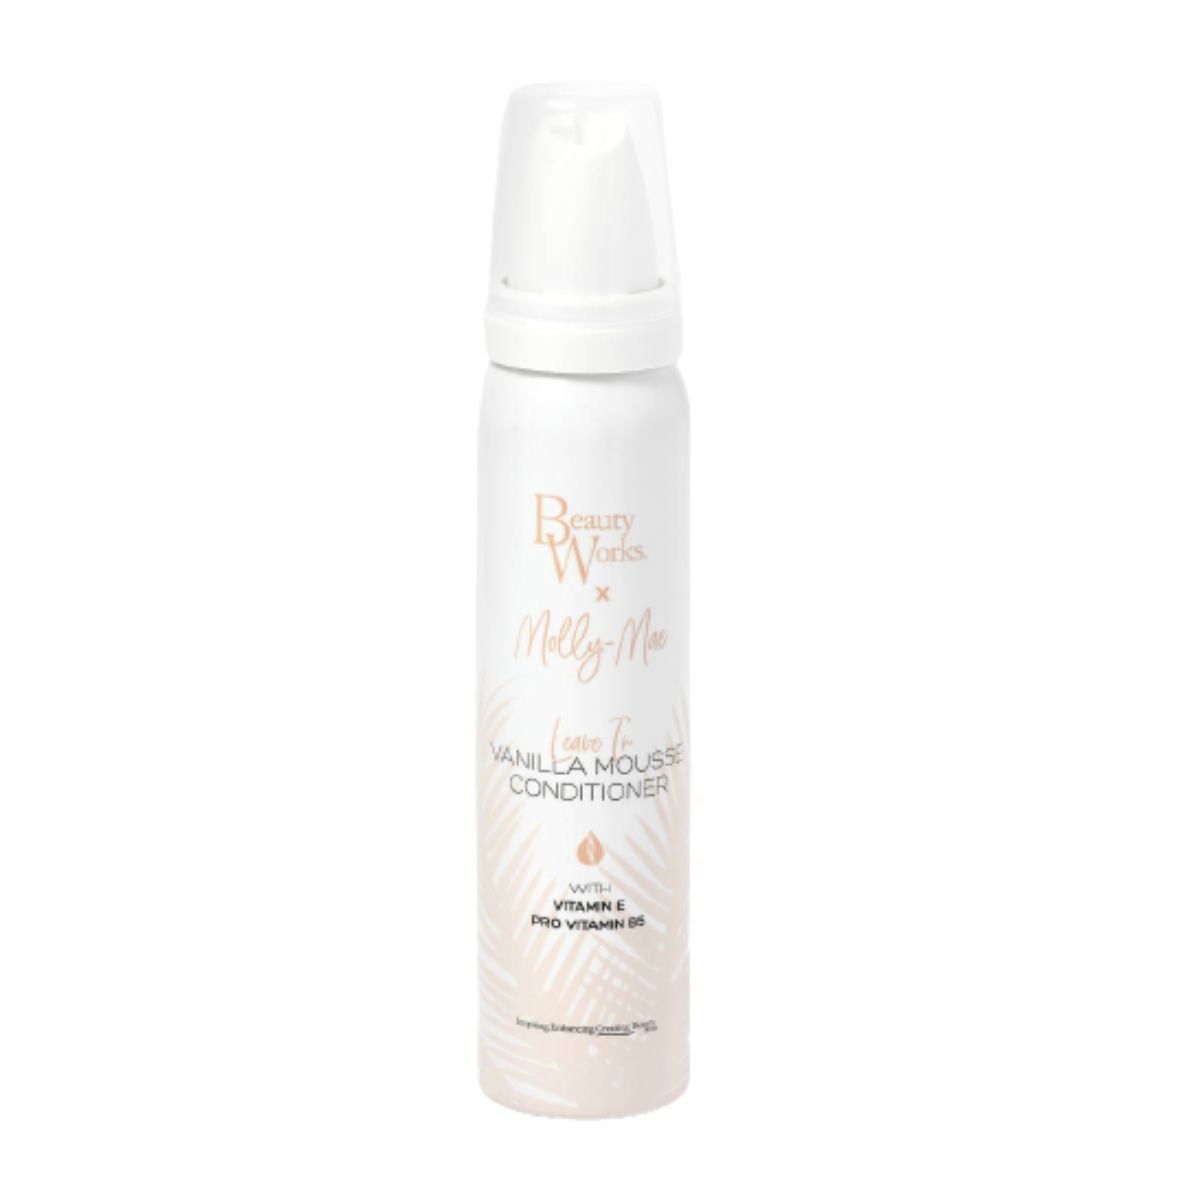 Beauty Works X Molly Mae Leave In Conditioner Mousse 100ml.